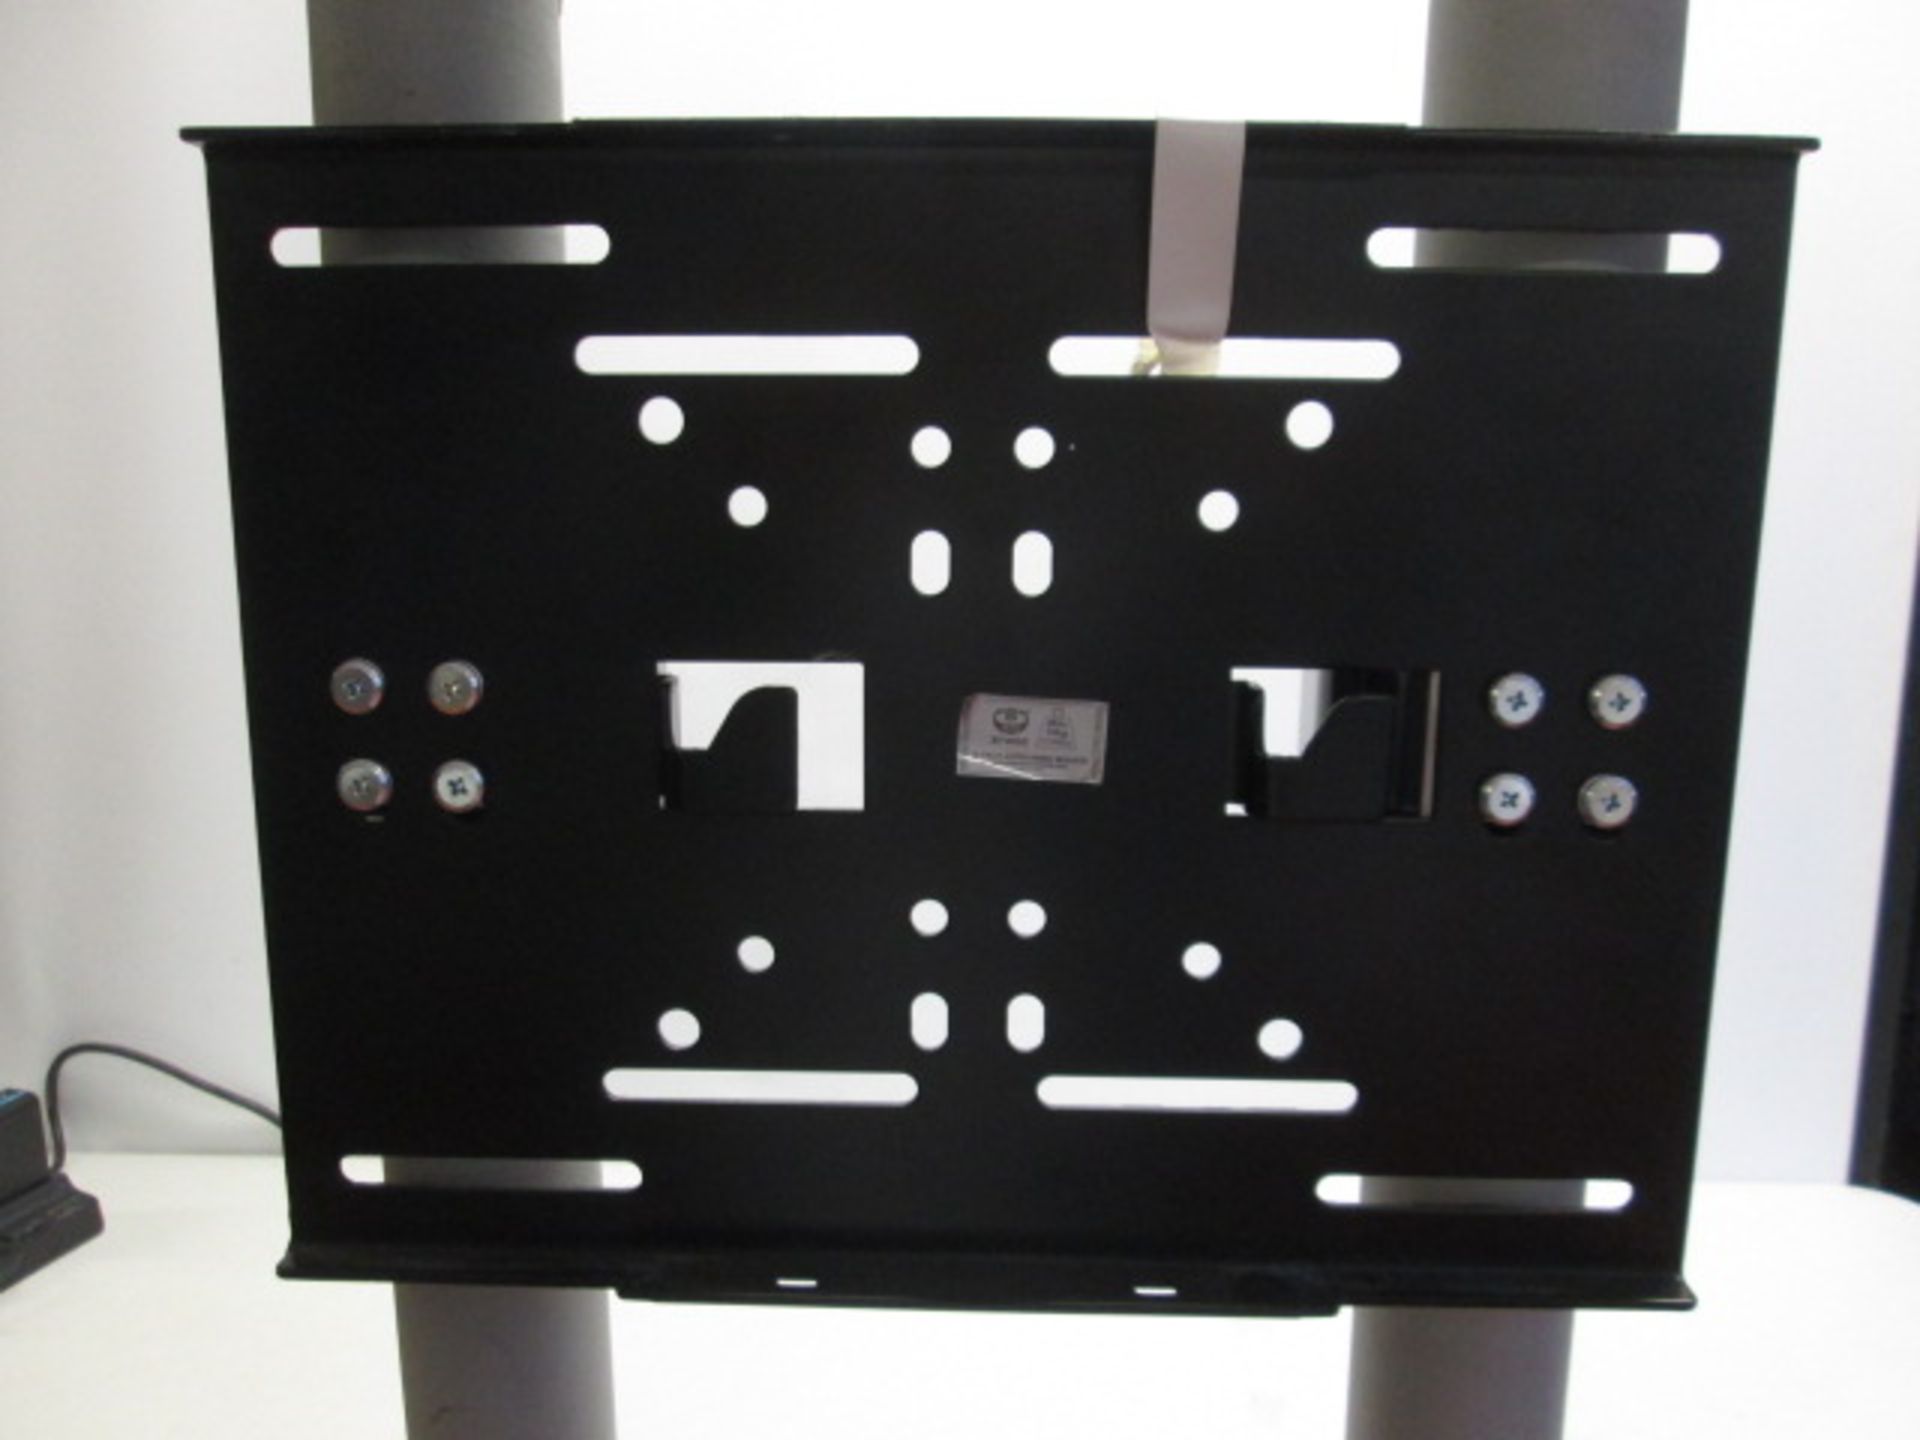 B-Tech Audio, Video Mount, 5ft Adjustable Height with TV Bracket Fixed. Max Cap 70kg/154lbs. - Image 2 of 3